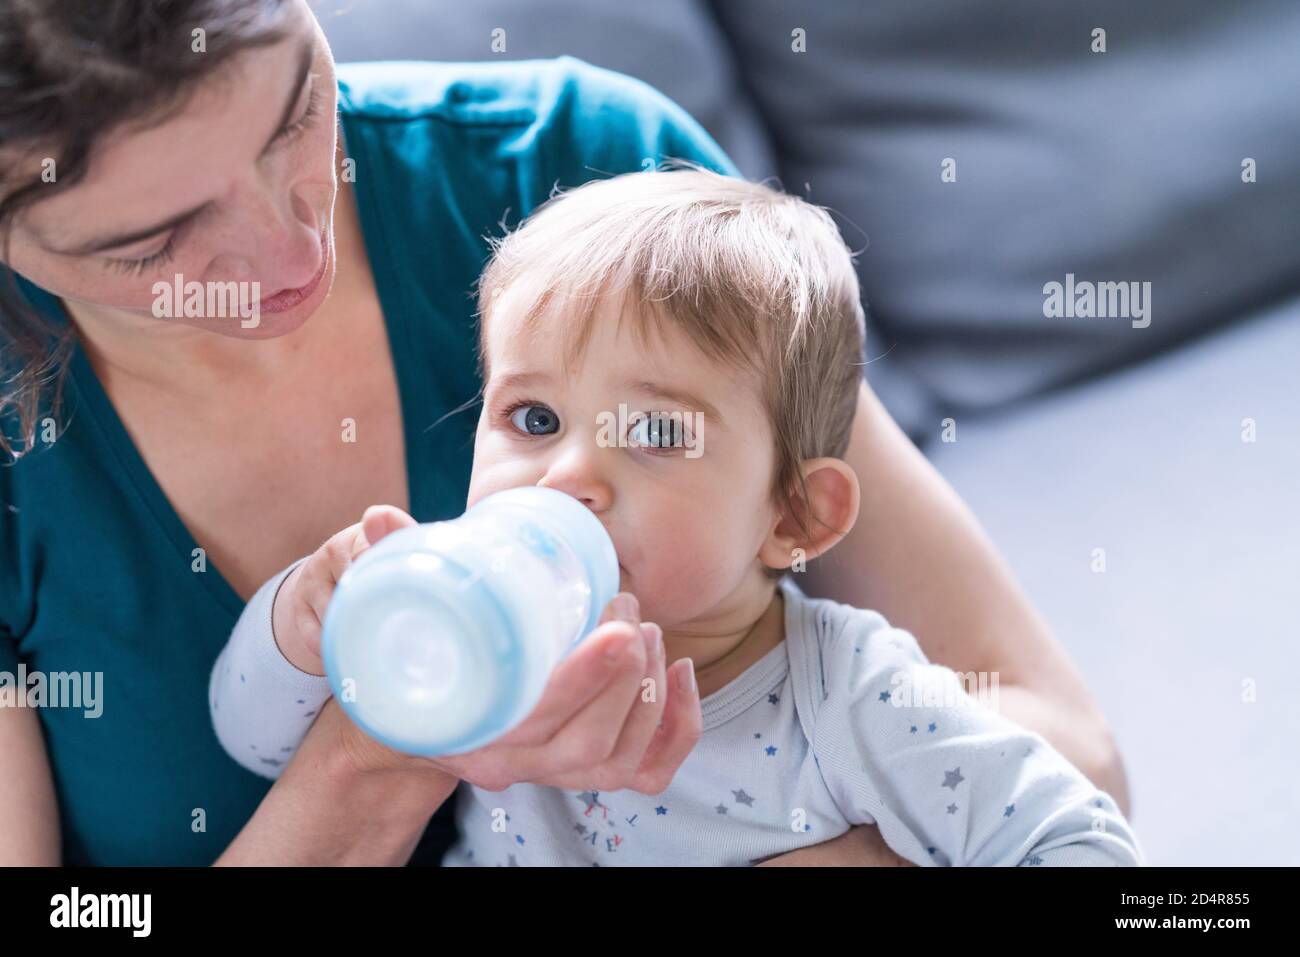 9 month baby girl drinking milk from a bottle. Stock Photo